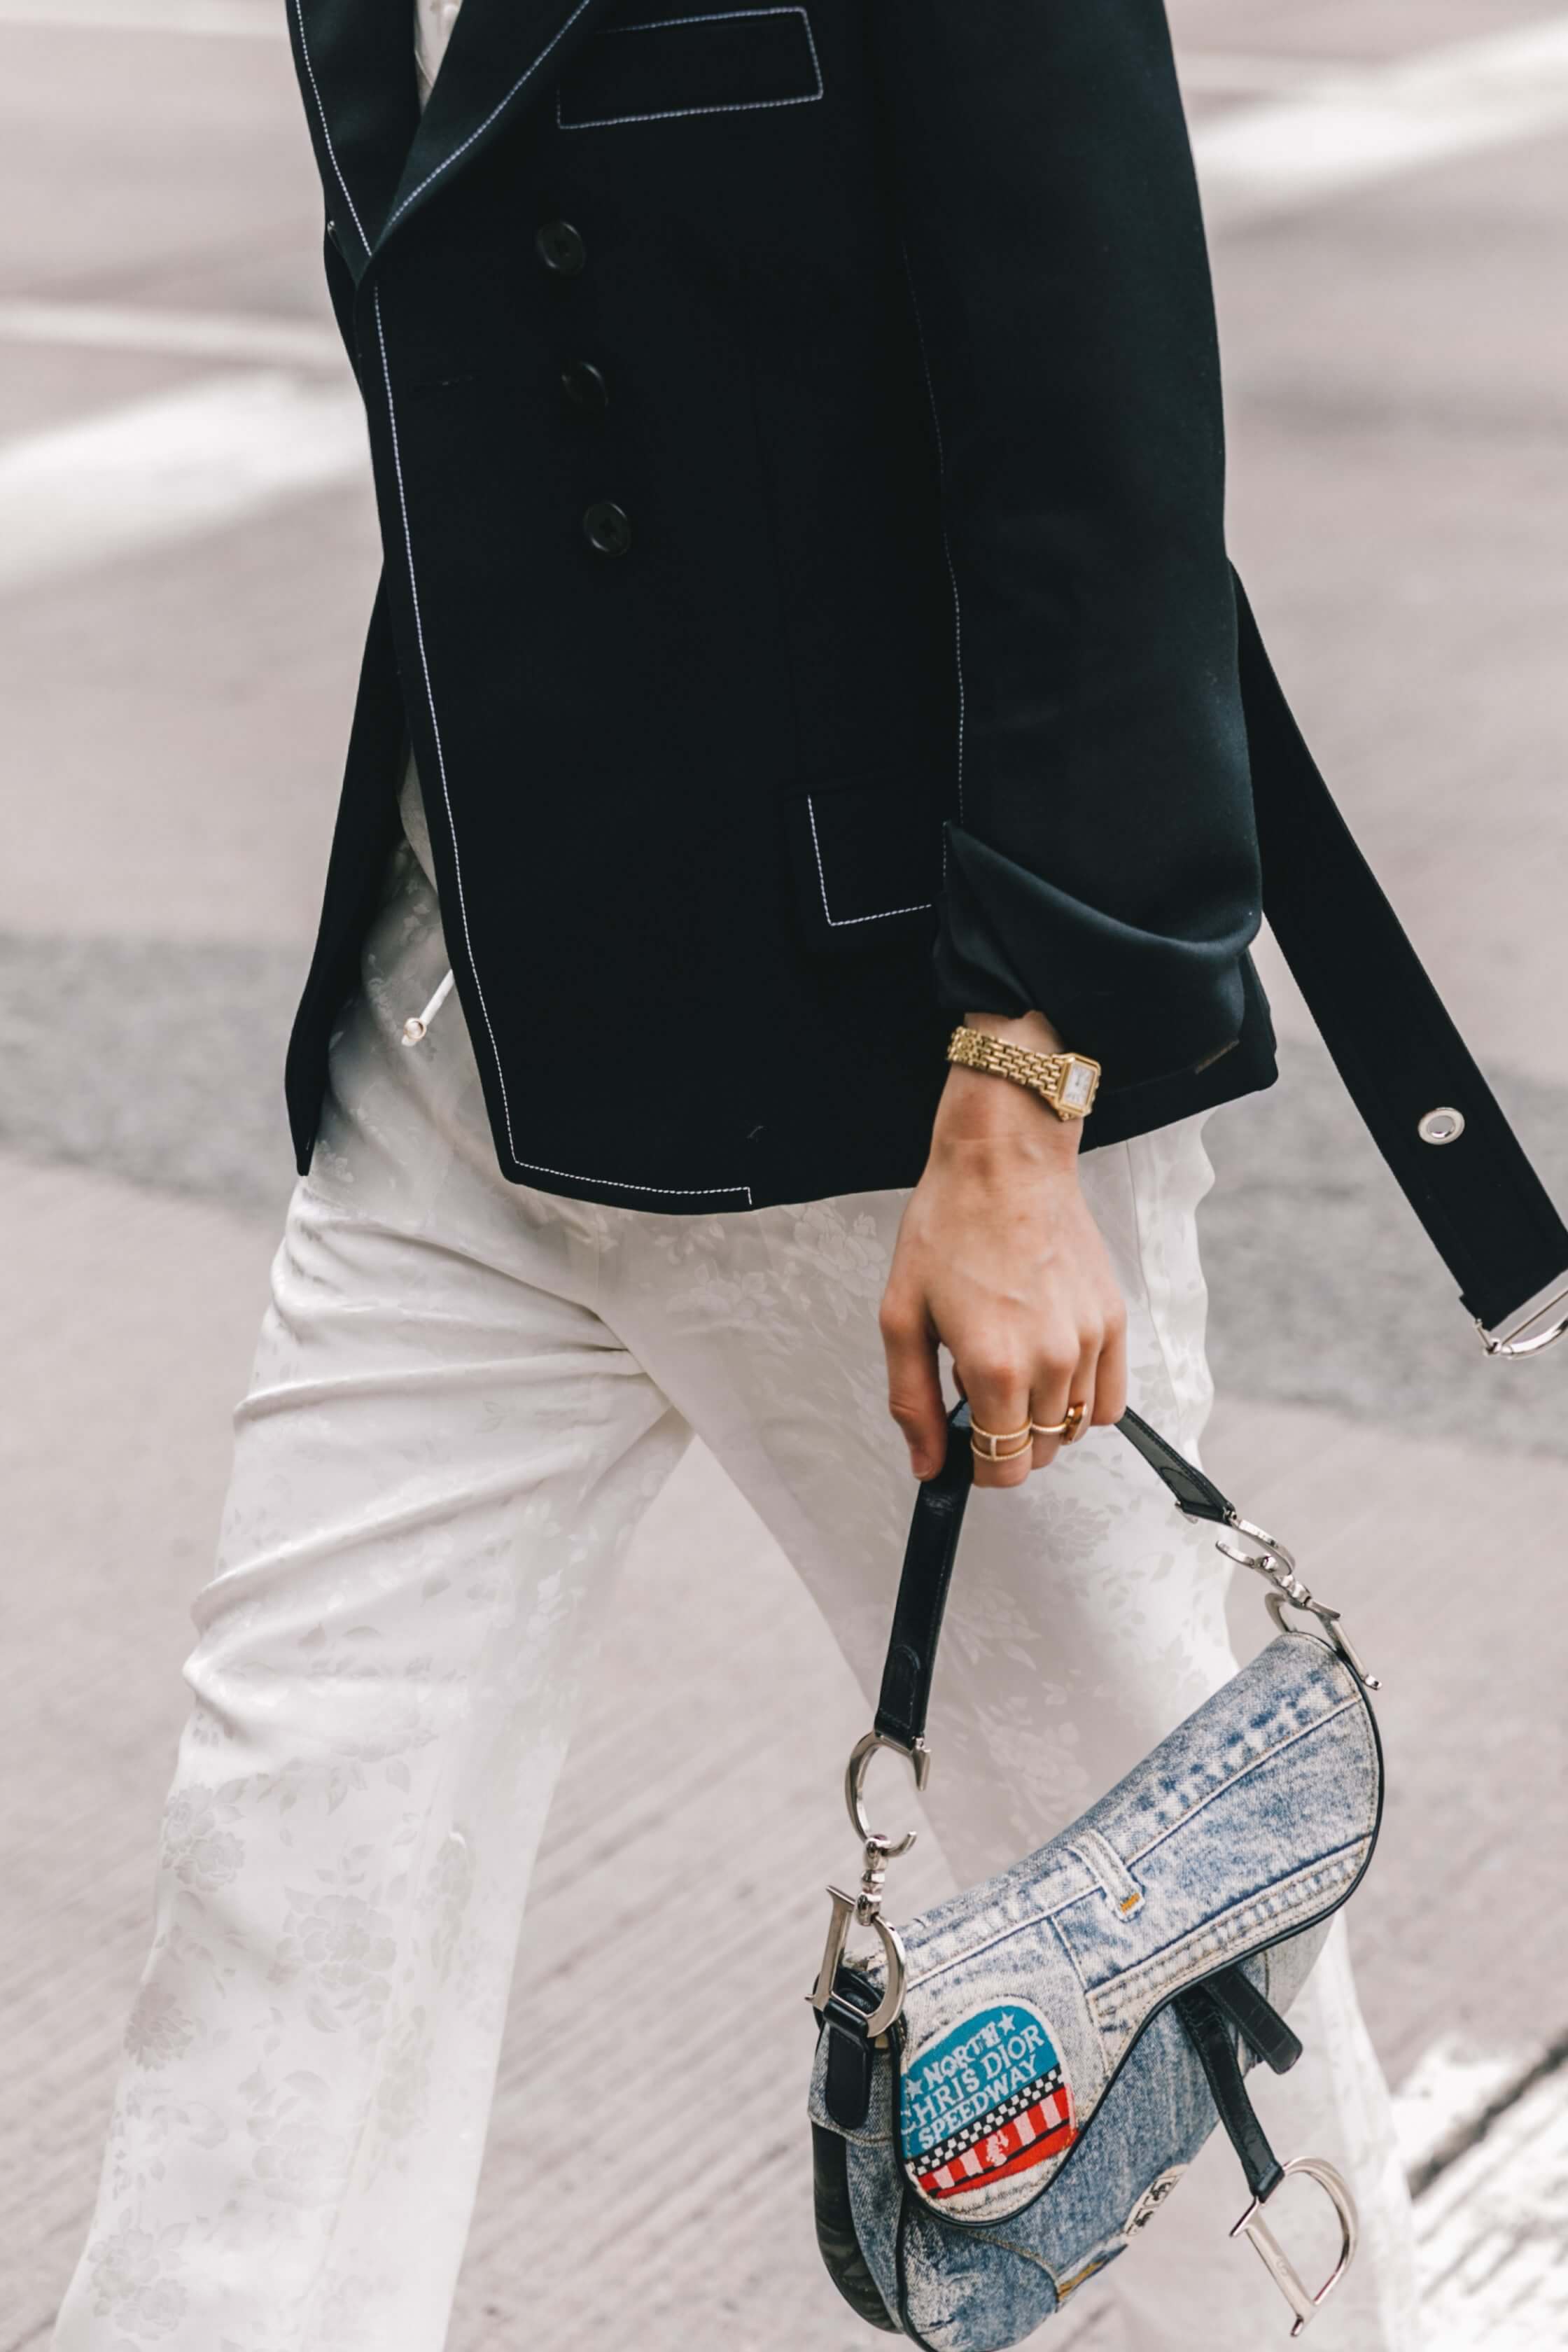 Dior saddle bag street style NYFY 2018 by Collage Vintage